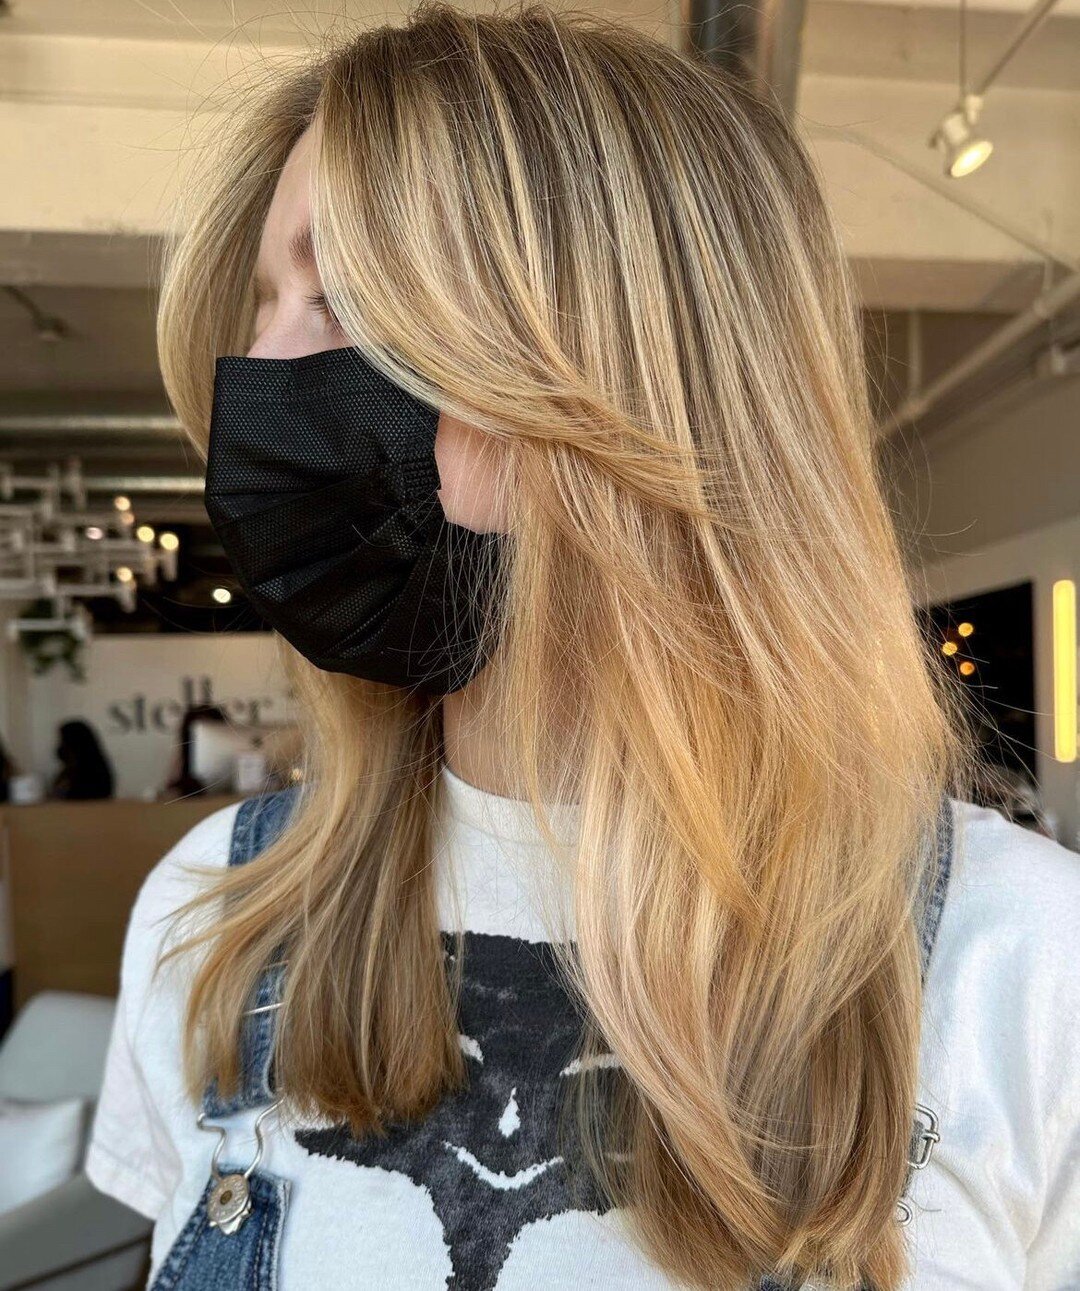 More stunning summer hair inspiration brought to you by the talented @ashcreatesinmpls ☀️

Ready to refresh your hair for the spring or summer? Ashley loves fashion colors and is passionate about creating a look that helps her clients feel most like 